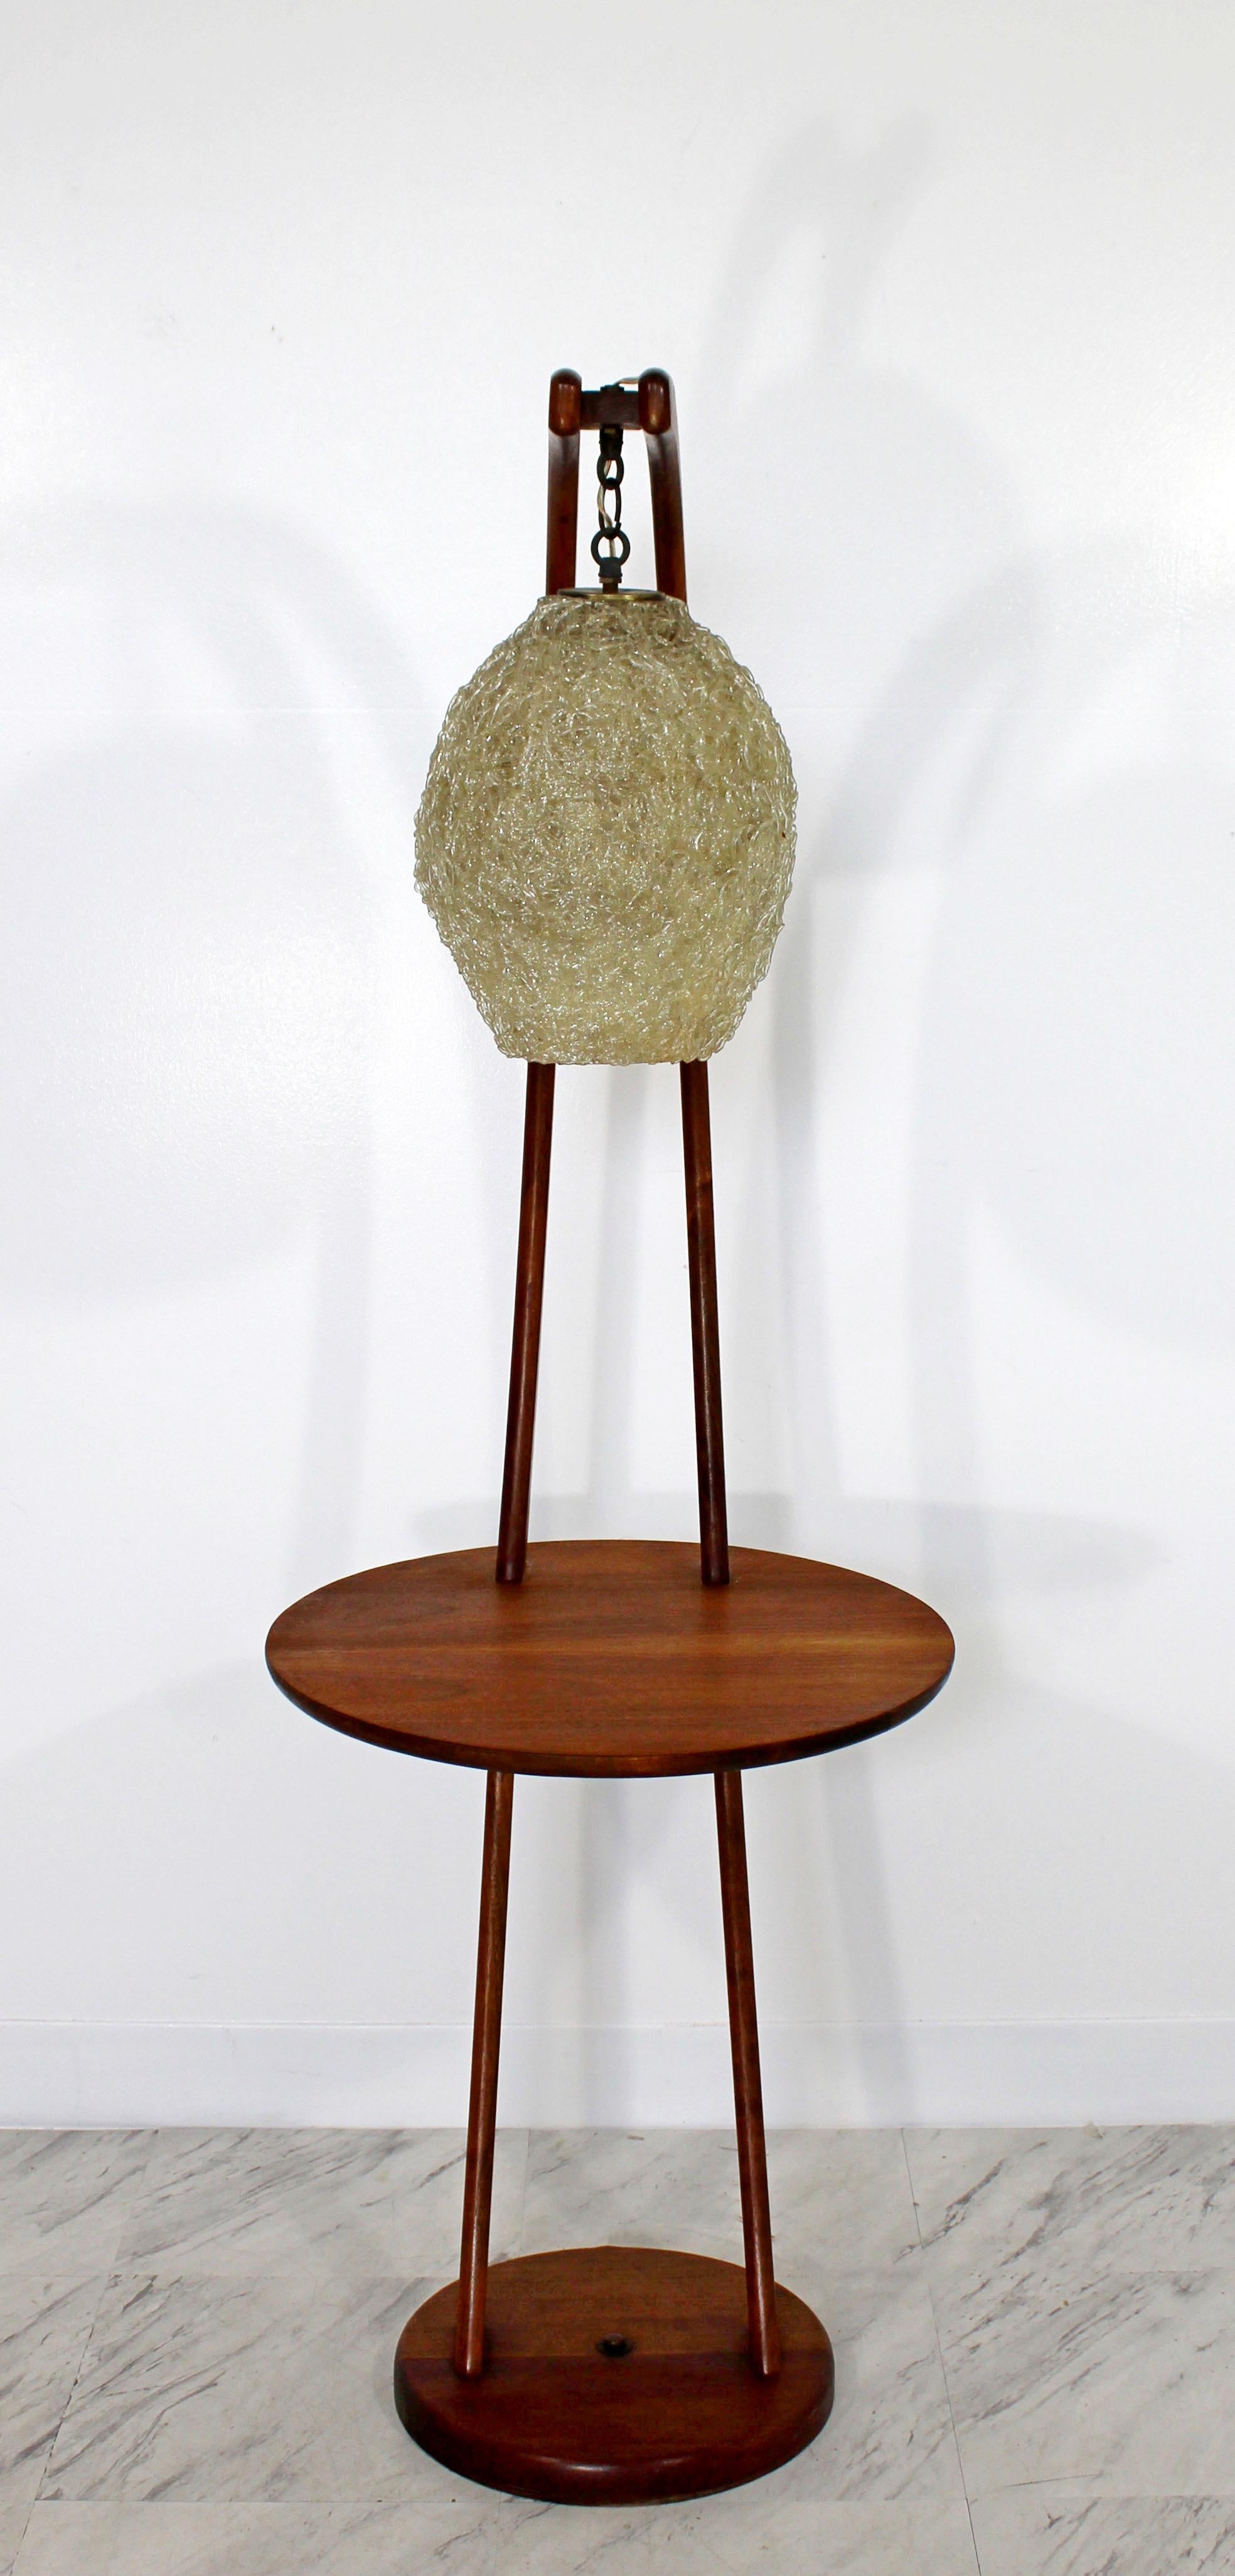 For your consideration is a magnificent, curved teak wood, floor lamp table, with a hanging, spaghetti resin shade, circa 1960s. In very good condition. The dimensions are 18